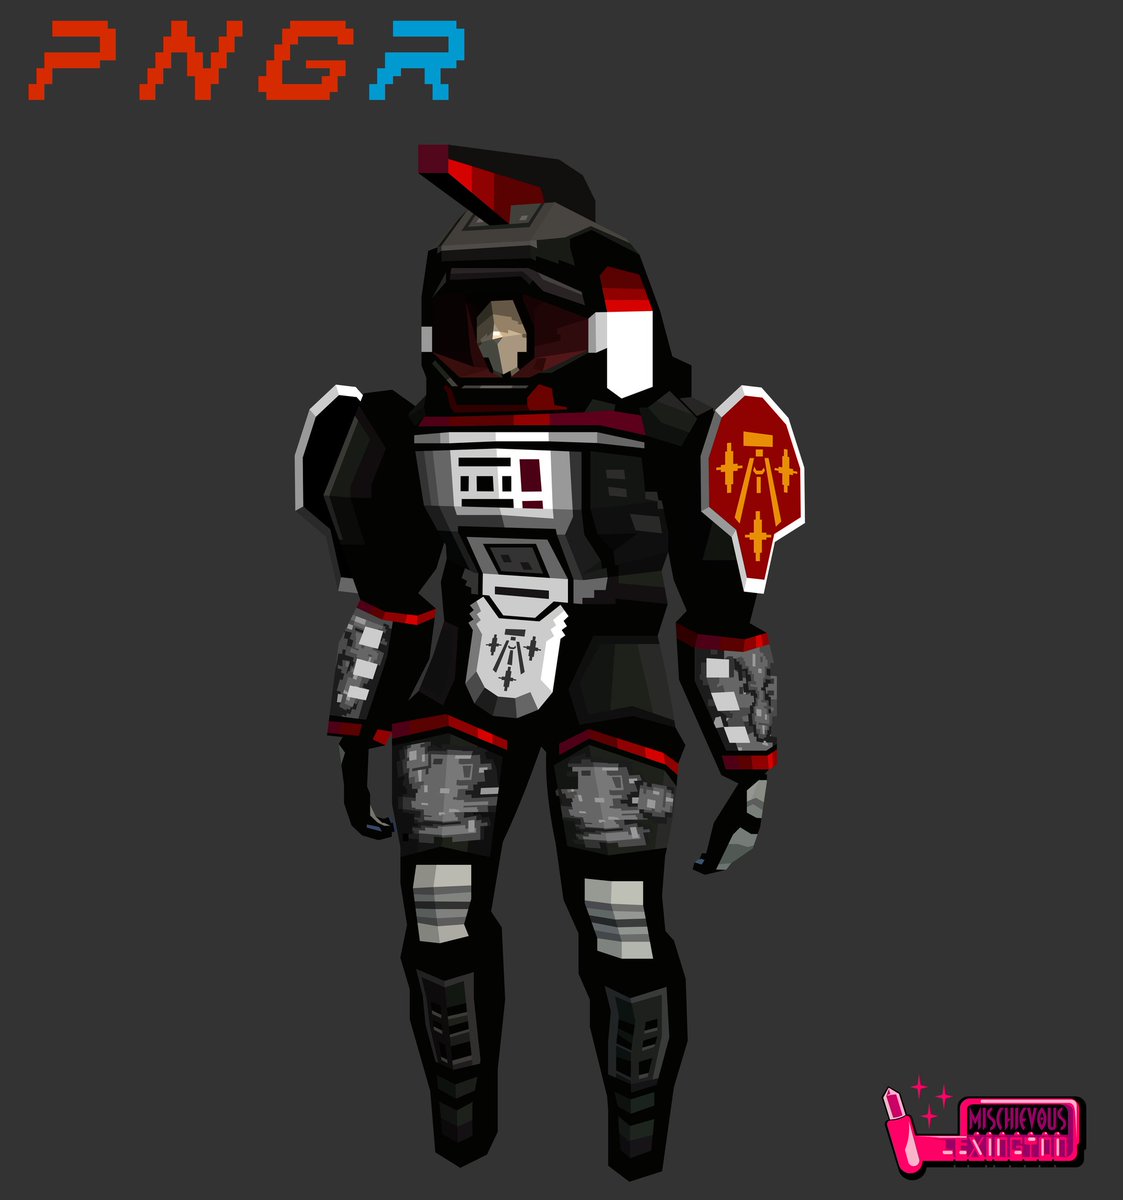 Another #SIGNALIS OC Commission done!!!  
A 3D model drawing commission of @ThatOneRobot_ 's PNGR unit. 
Genossinnen: You can still ask me for more #signalisOC comms!